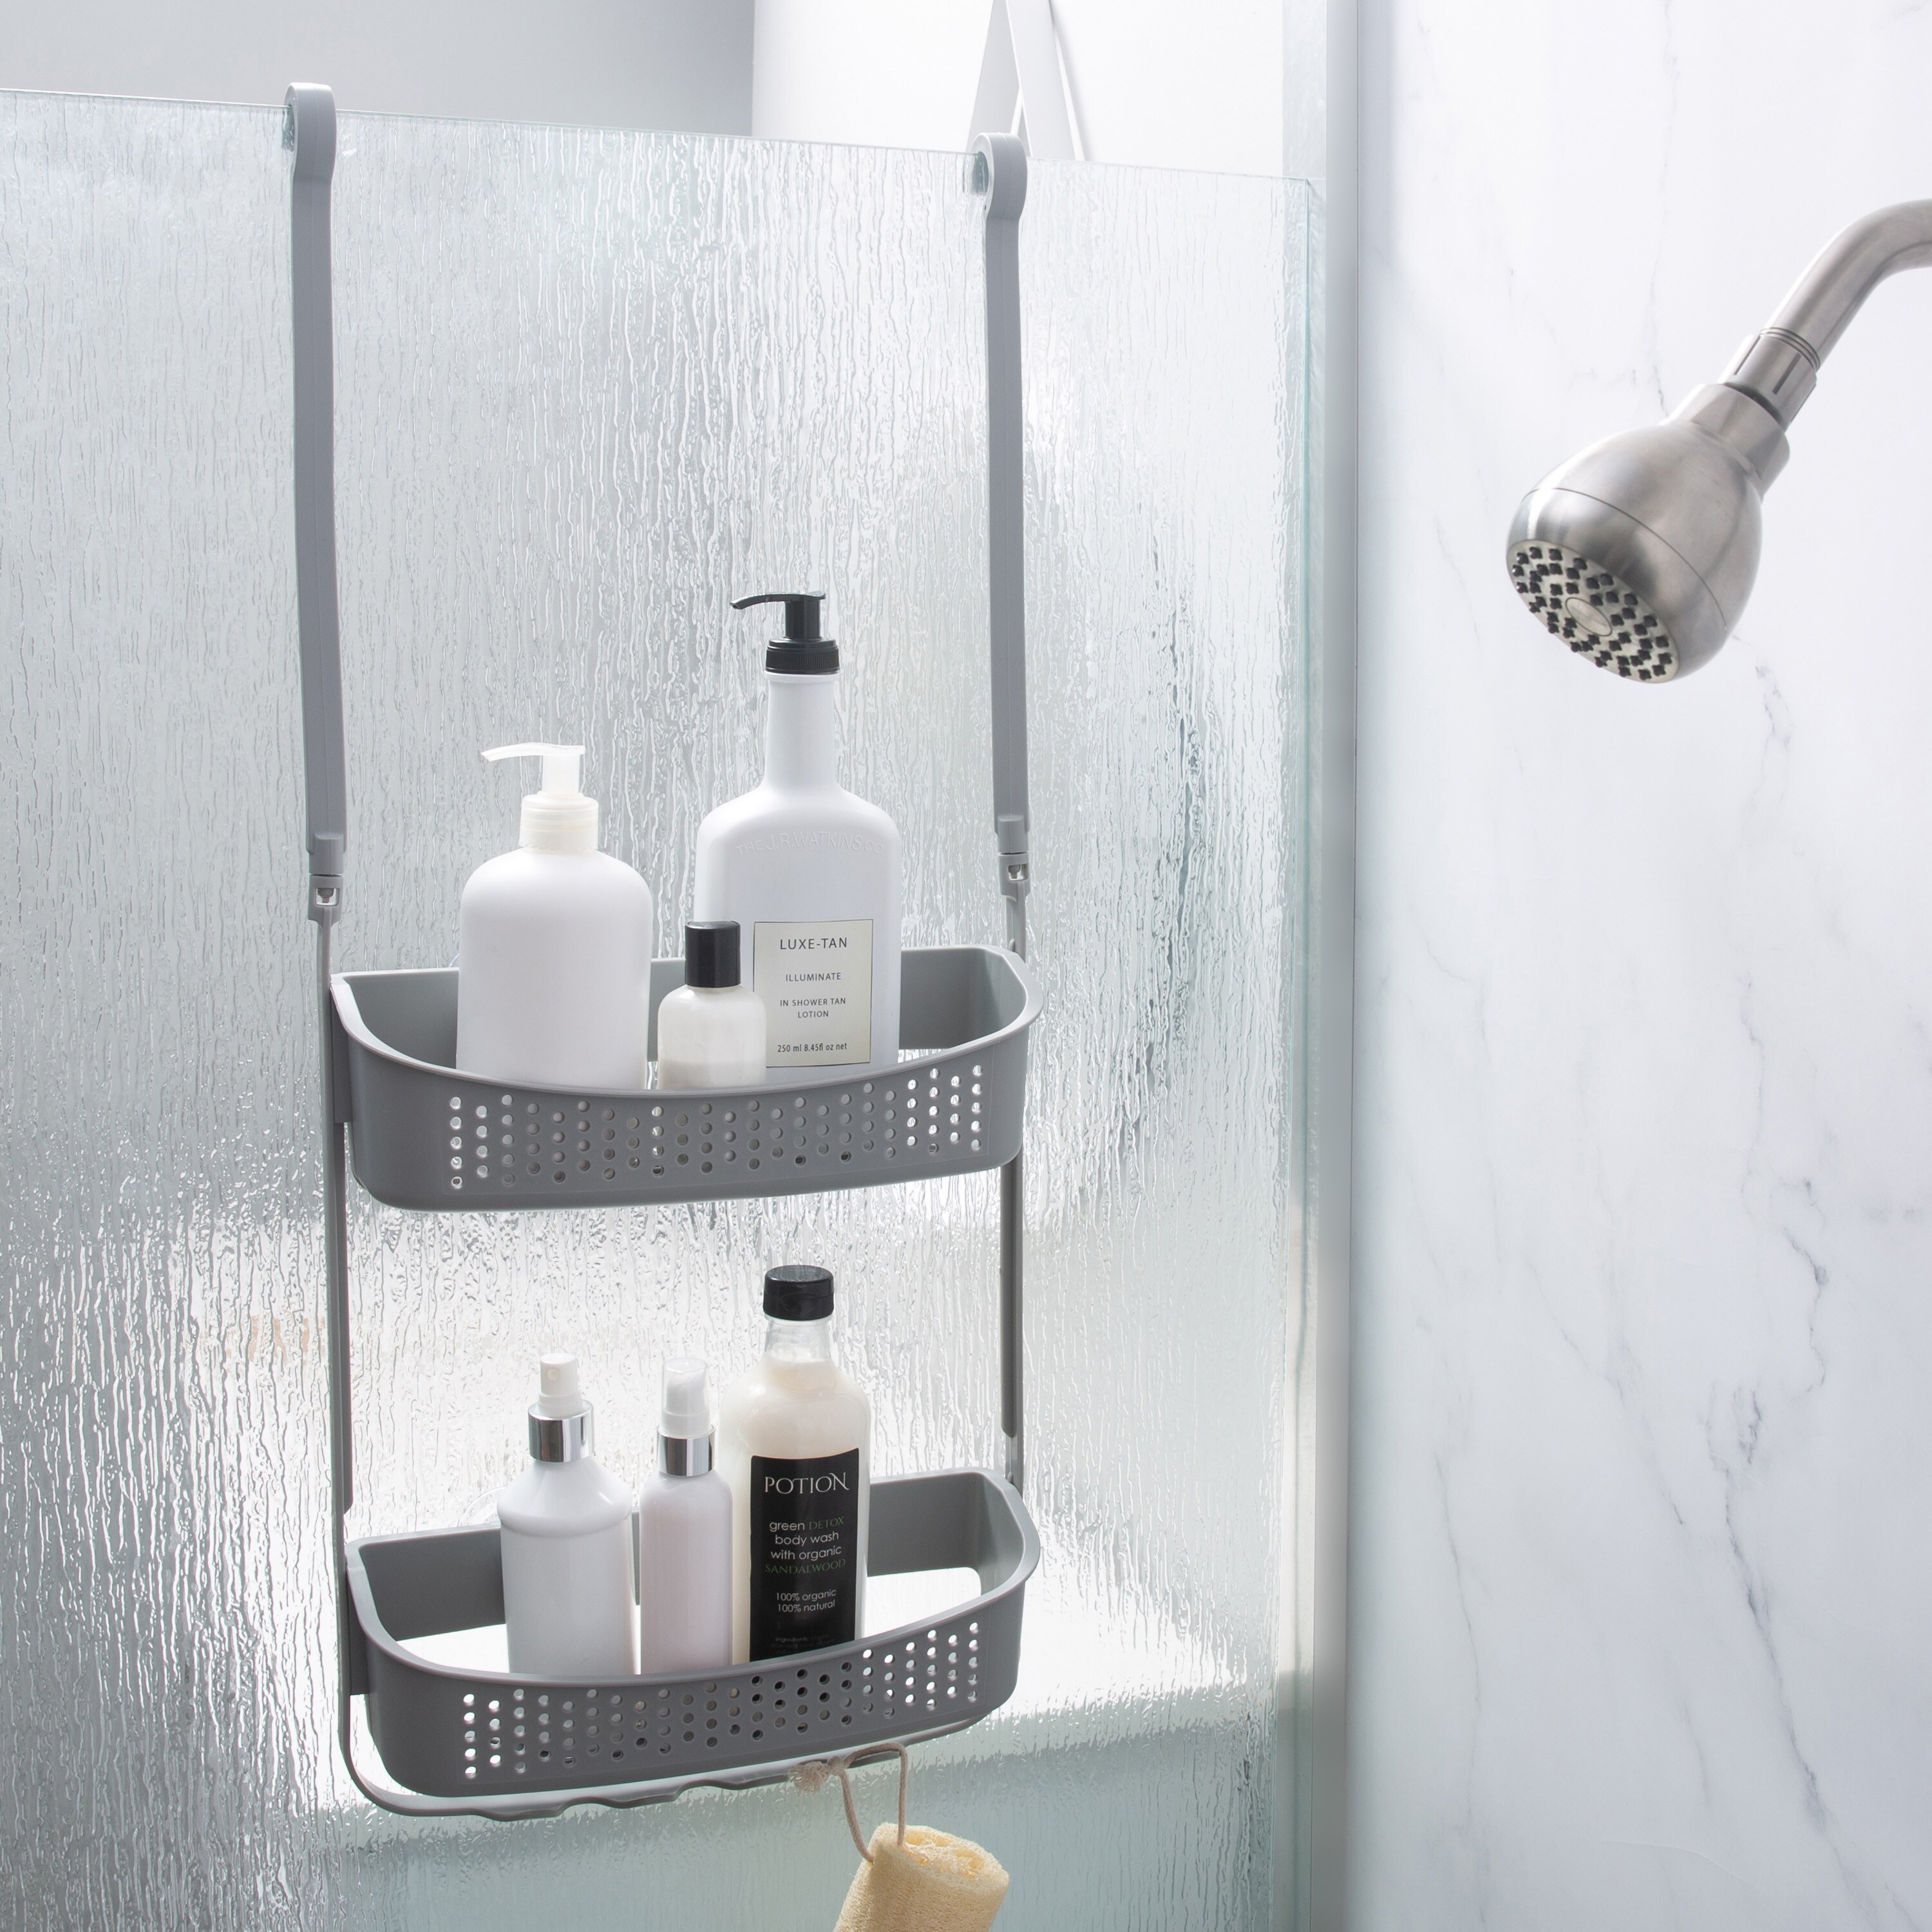 https://ak1.ostkcdn.com/images/products/is/images/direct/3e12827d0f5fccba114eb0a7df1d889cec3fff9d/Bath-Bliss-2-Way-Convertible-Shower-Caddy-in-Grey.jpg